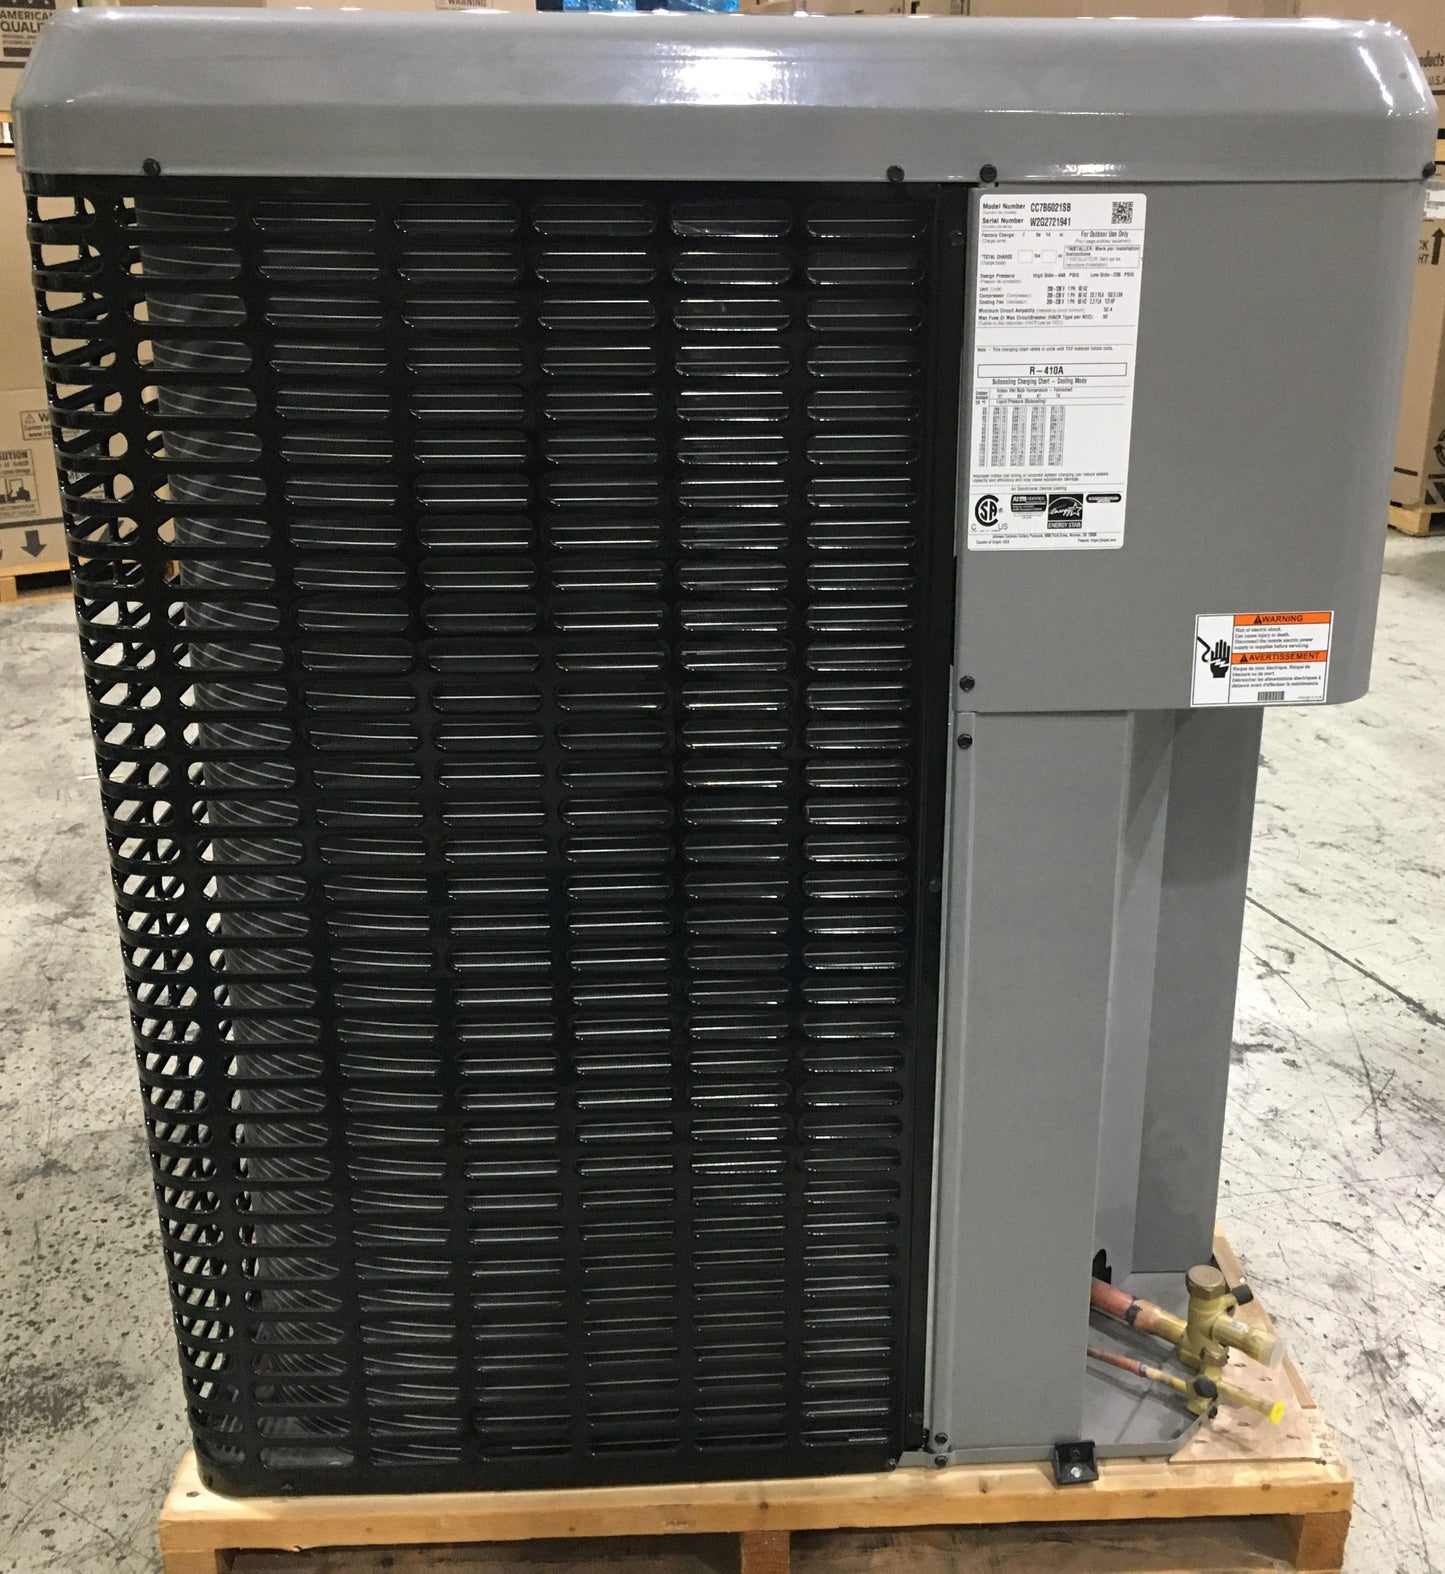 5 TON SPLIT-SYSTEM AIR CONDITIONER 208-230/60/1 R410A 17 SEER